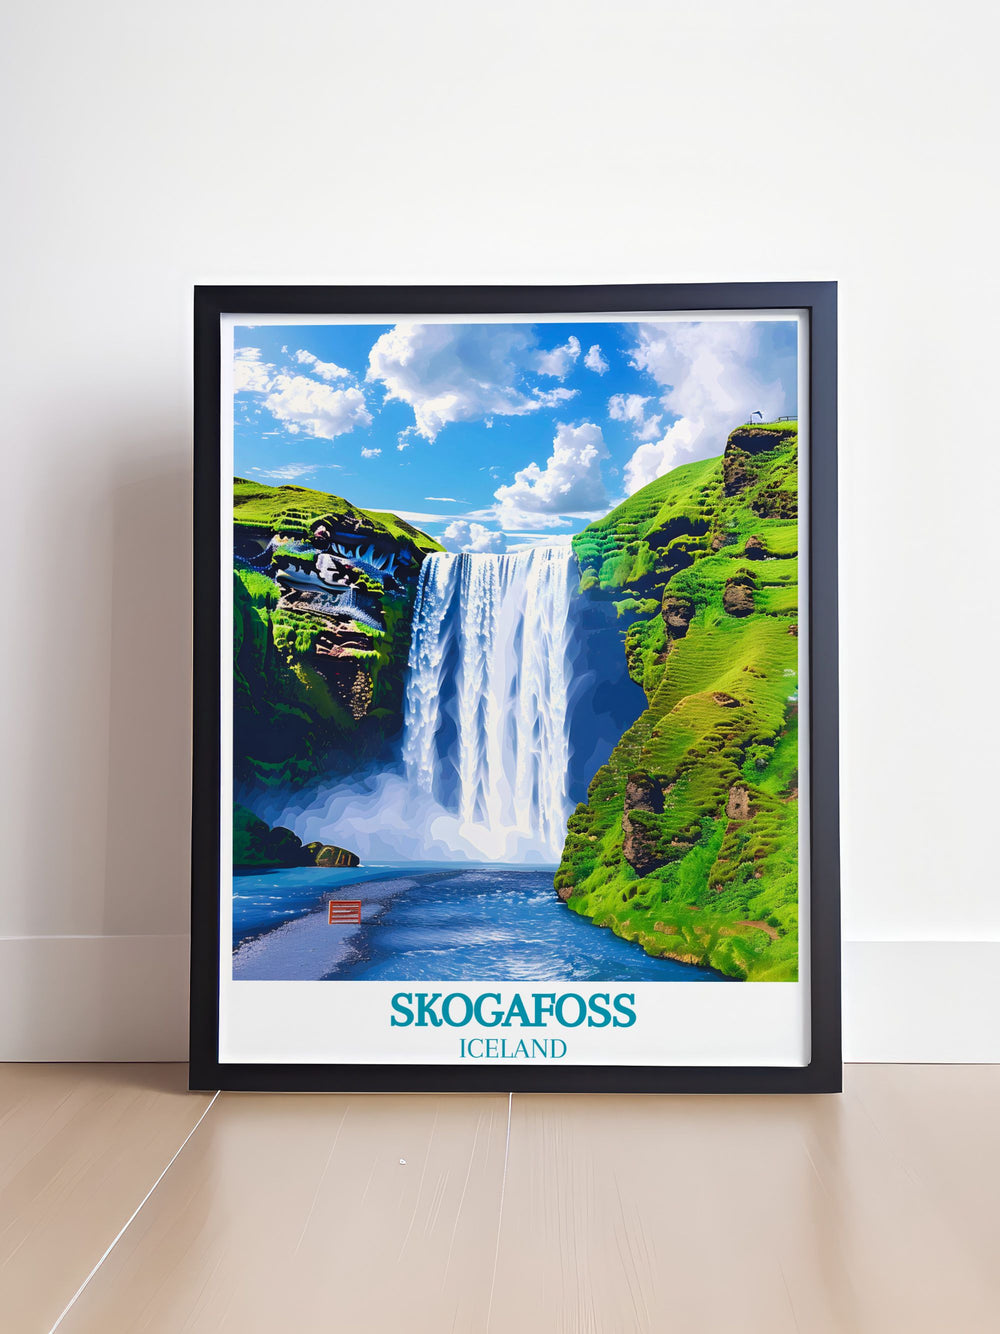 Experience the awe inspiring Skogafoss in Iceland with this detailed art print, capturing the powerful cascade and the lush green landscape surrounding it.